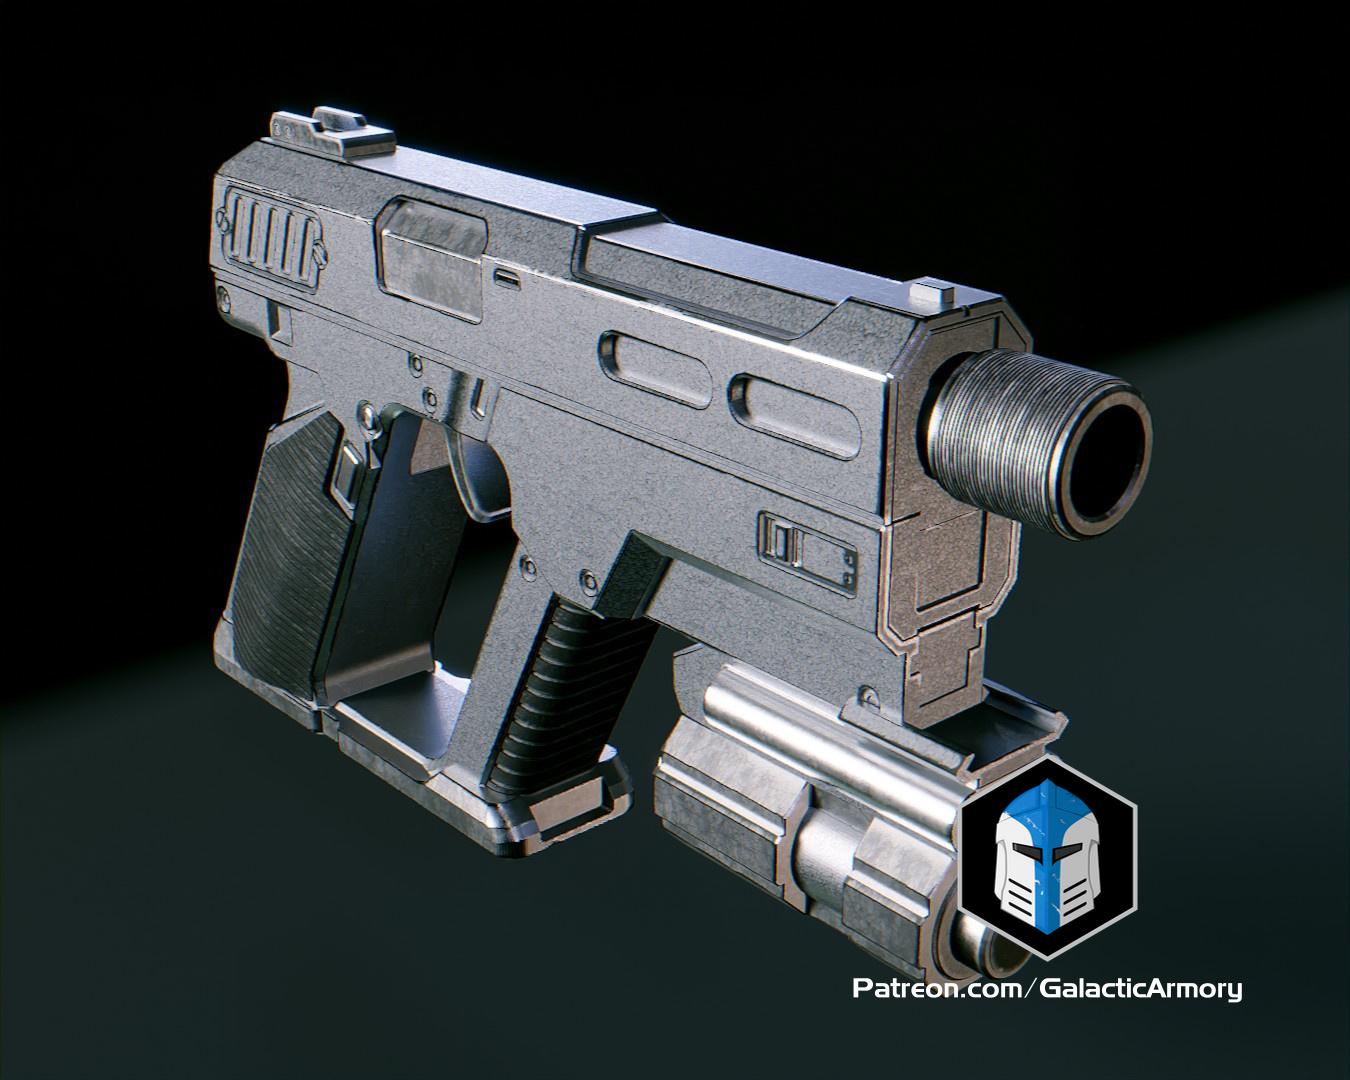 [New Files!] The Helldivers 2 Peacemaker Pistol has been added to the Specialist rewards!